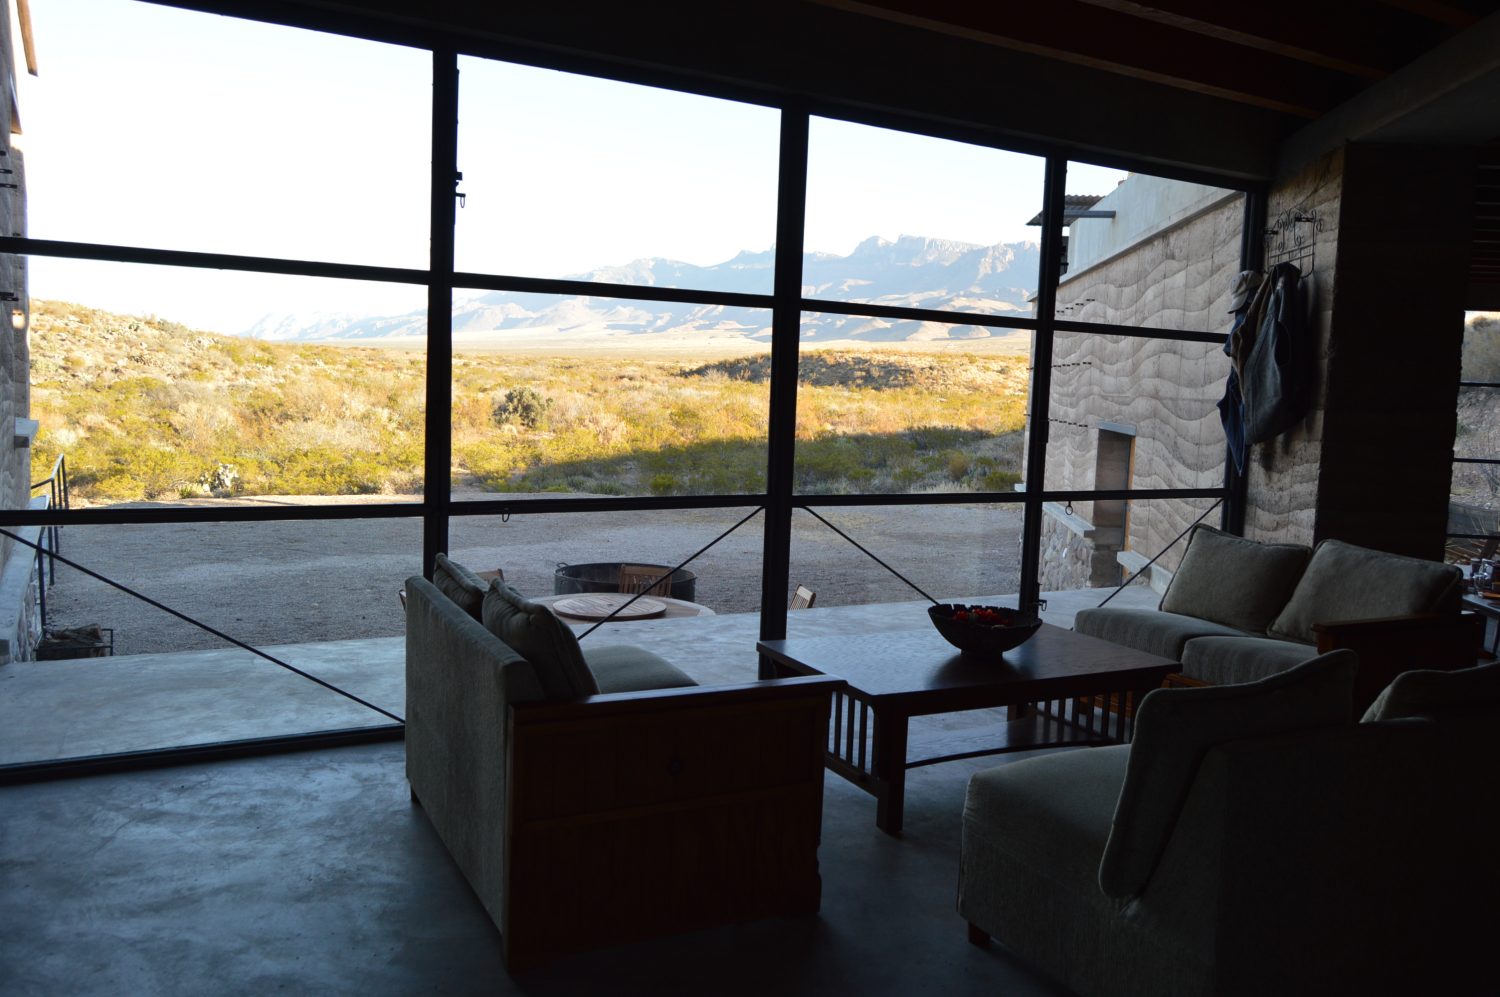 Seating area with windows facing mountains in La Cueva